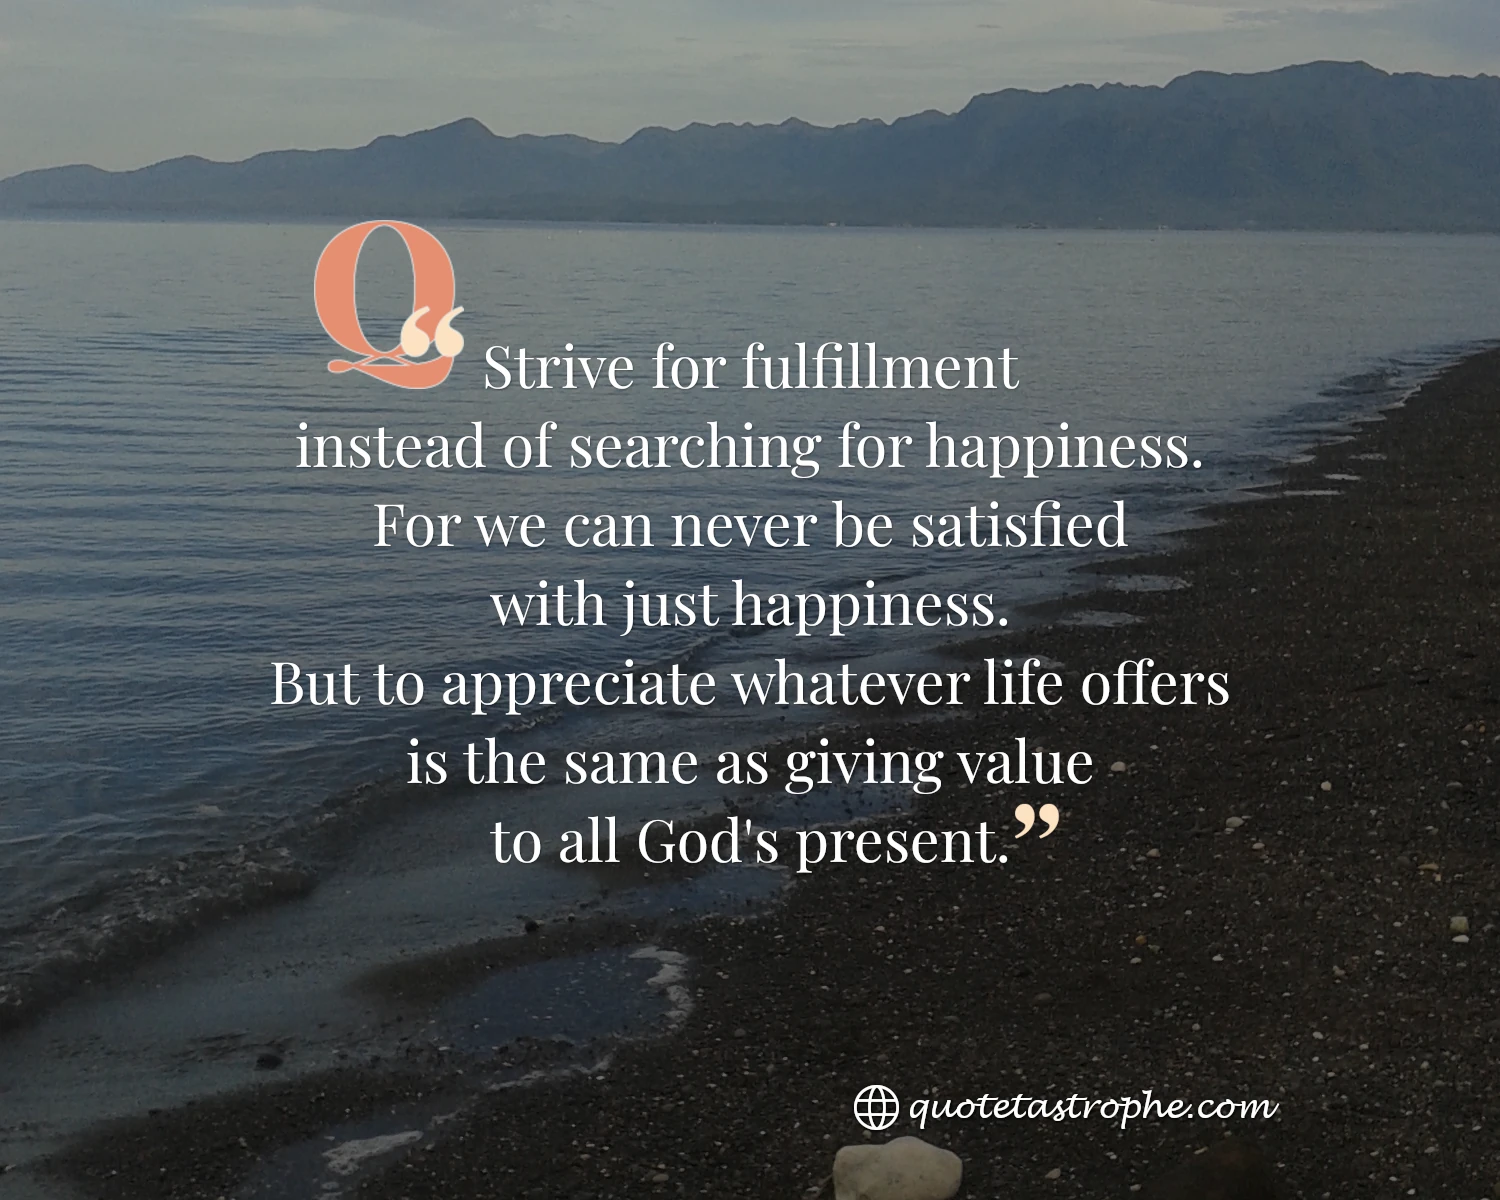 Strive For Fulfillment Instead of Searching For Happiness